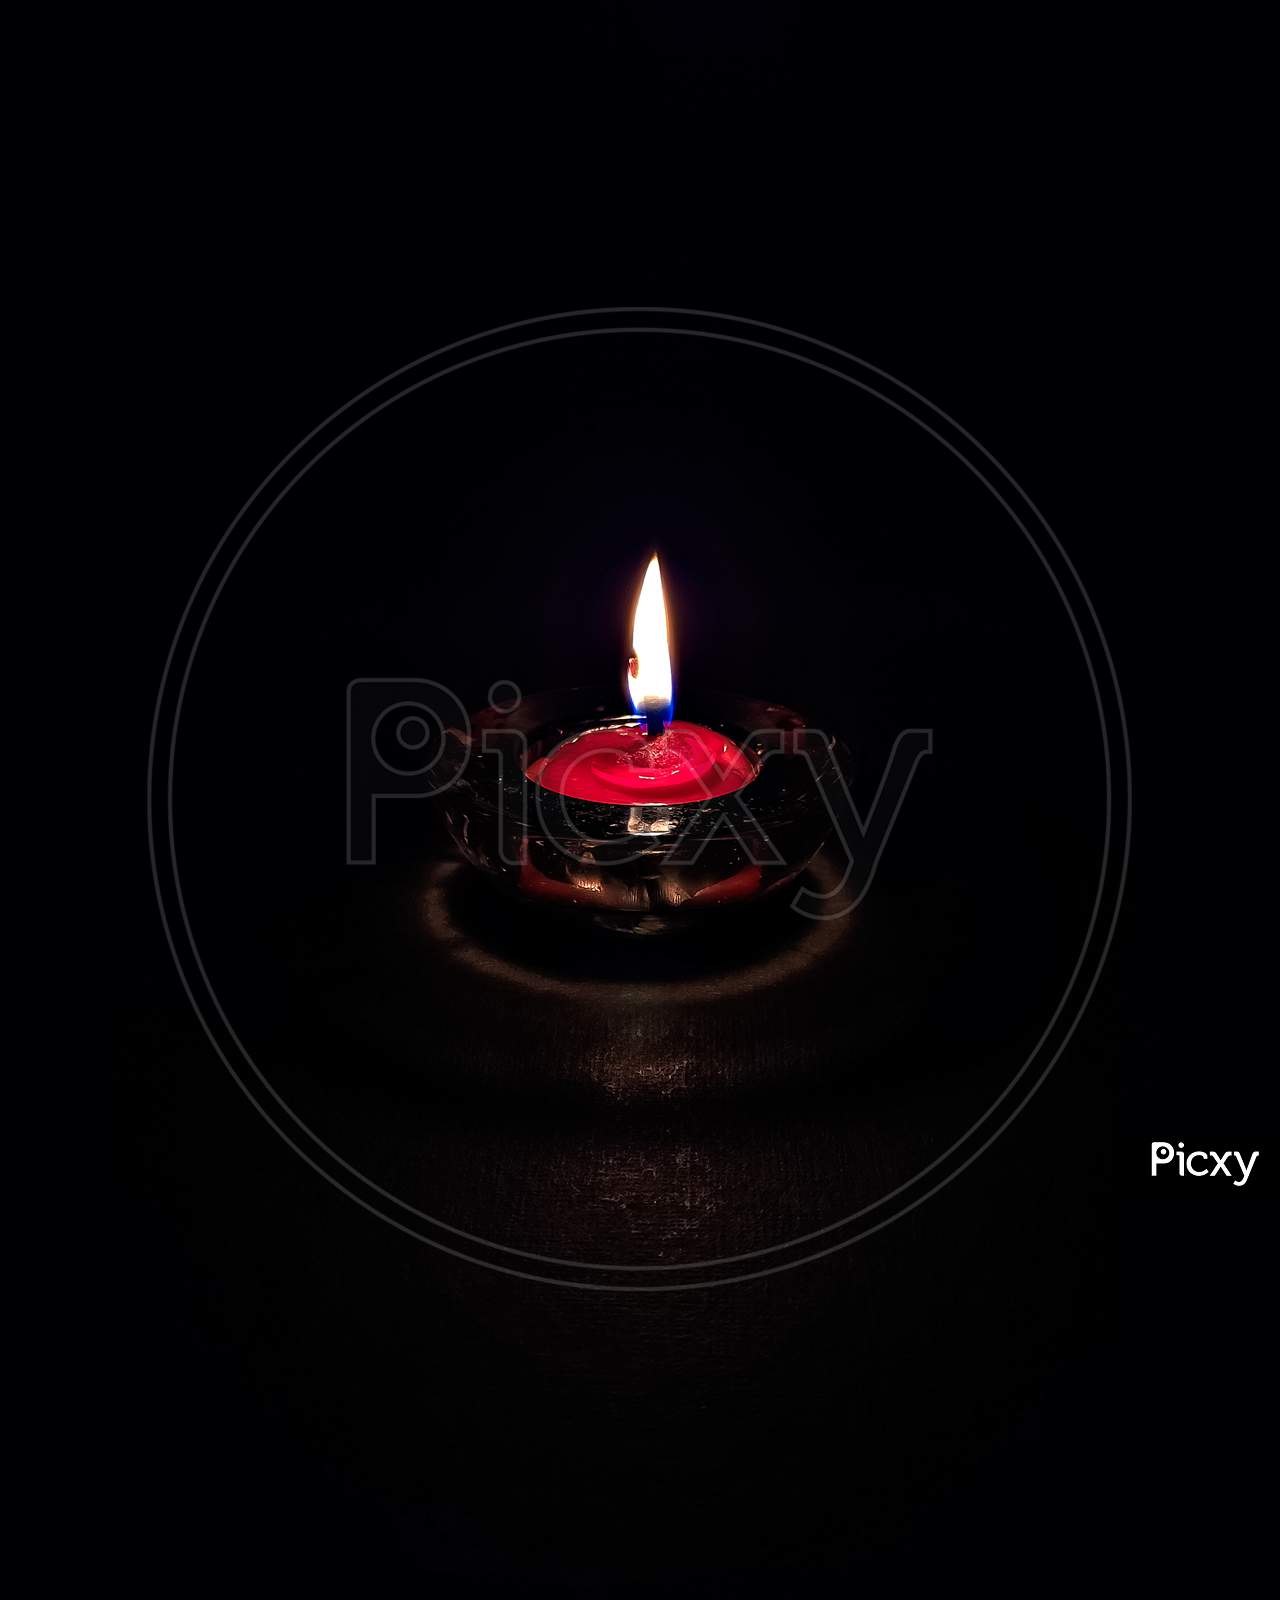 Isolated ,Closeup Image Of Small Red Colored Wax Lamp(Diya) Burning In Dark.